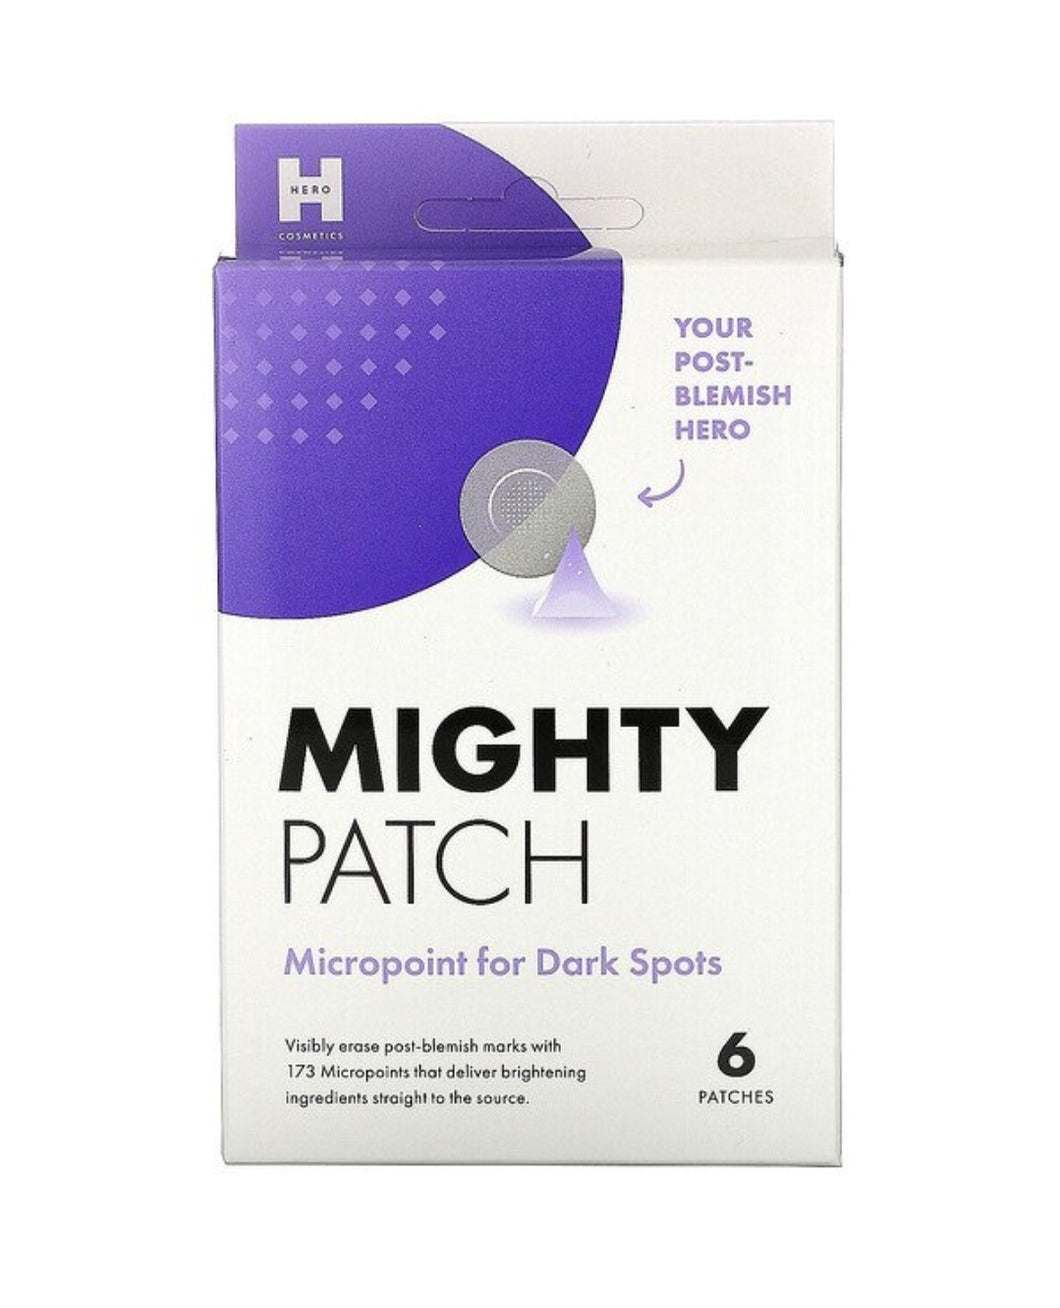 Micropoint for dark spots mighty patch